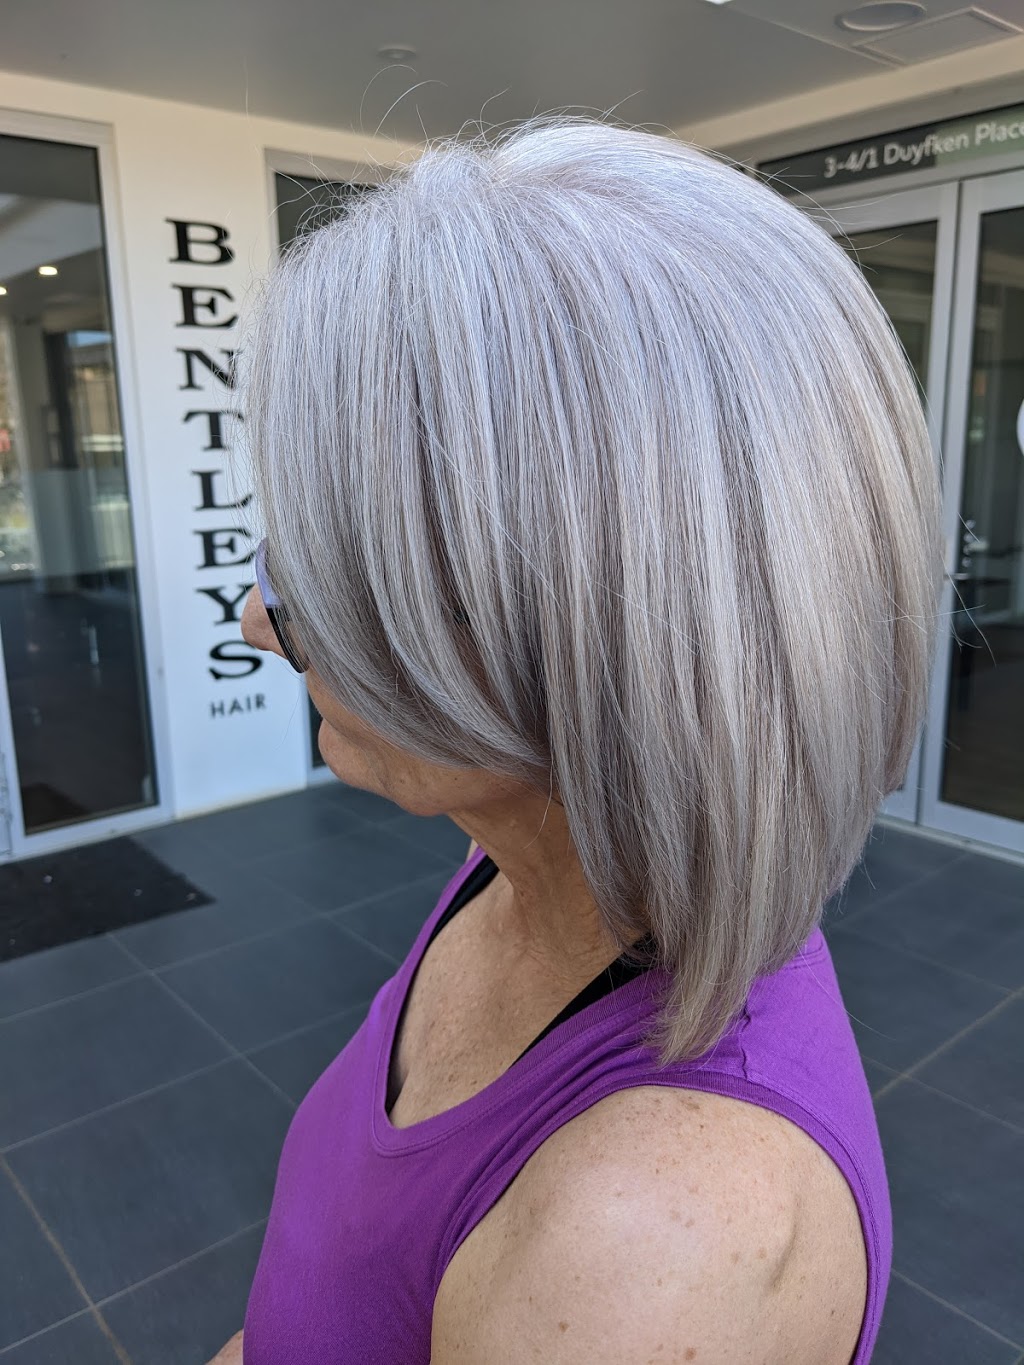 Bentleys Hair at Red Hill | hair care | 2/1-11 Duyfken Pl, Red Hill ACT 2603, Australia | 0262606731 OR +61 2 6260 6731